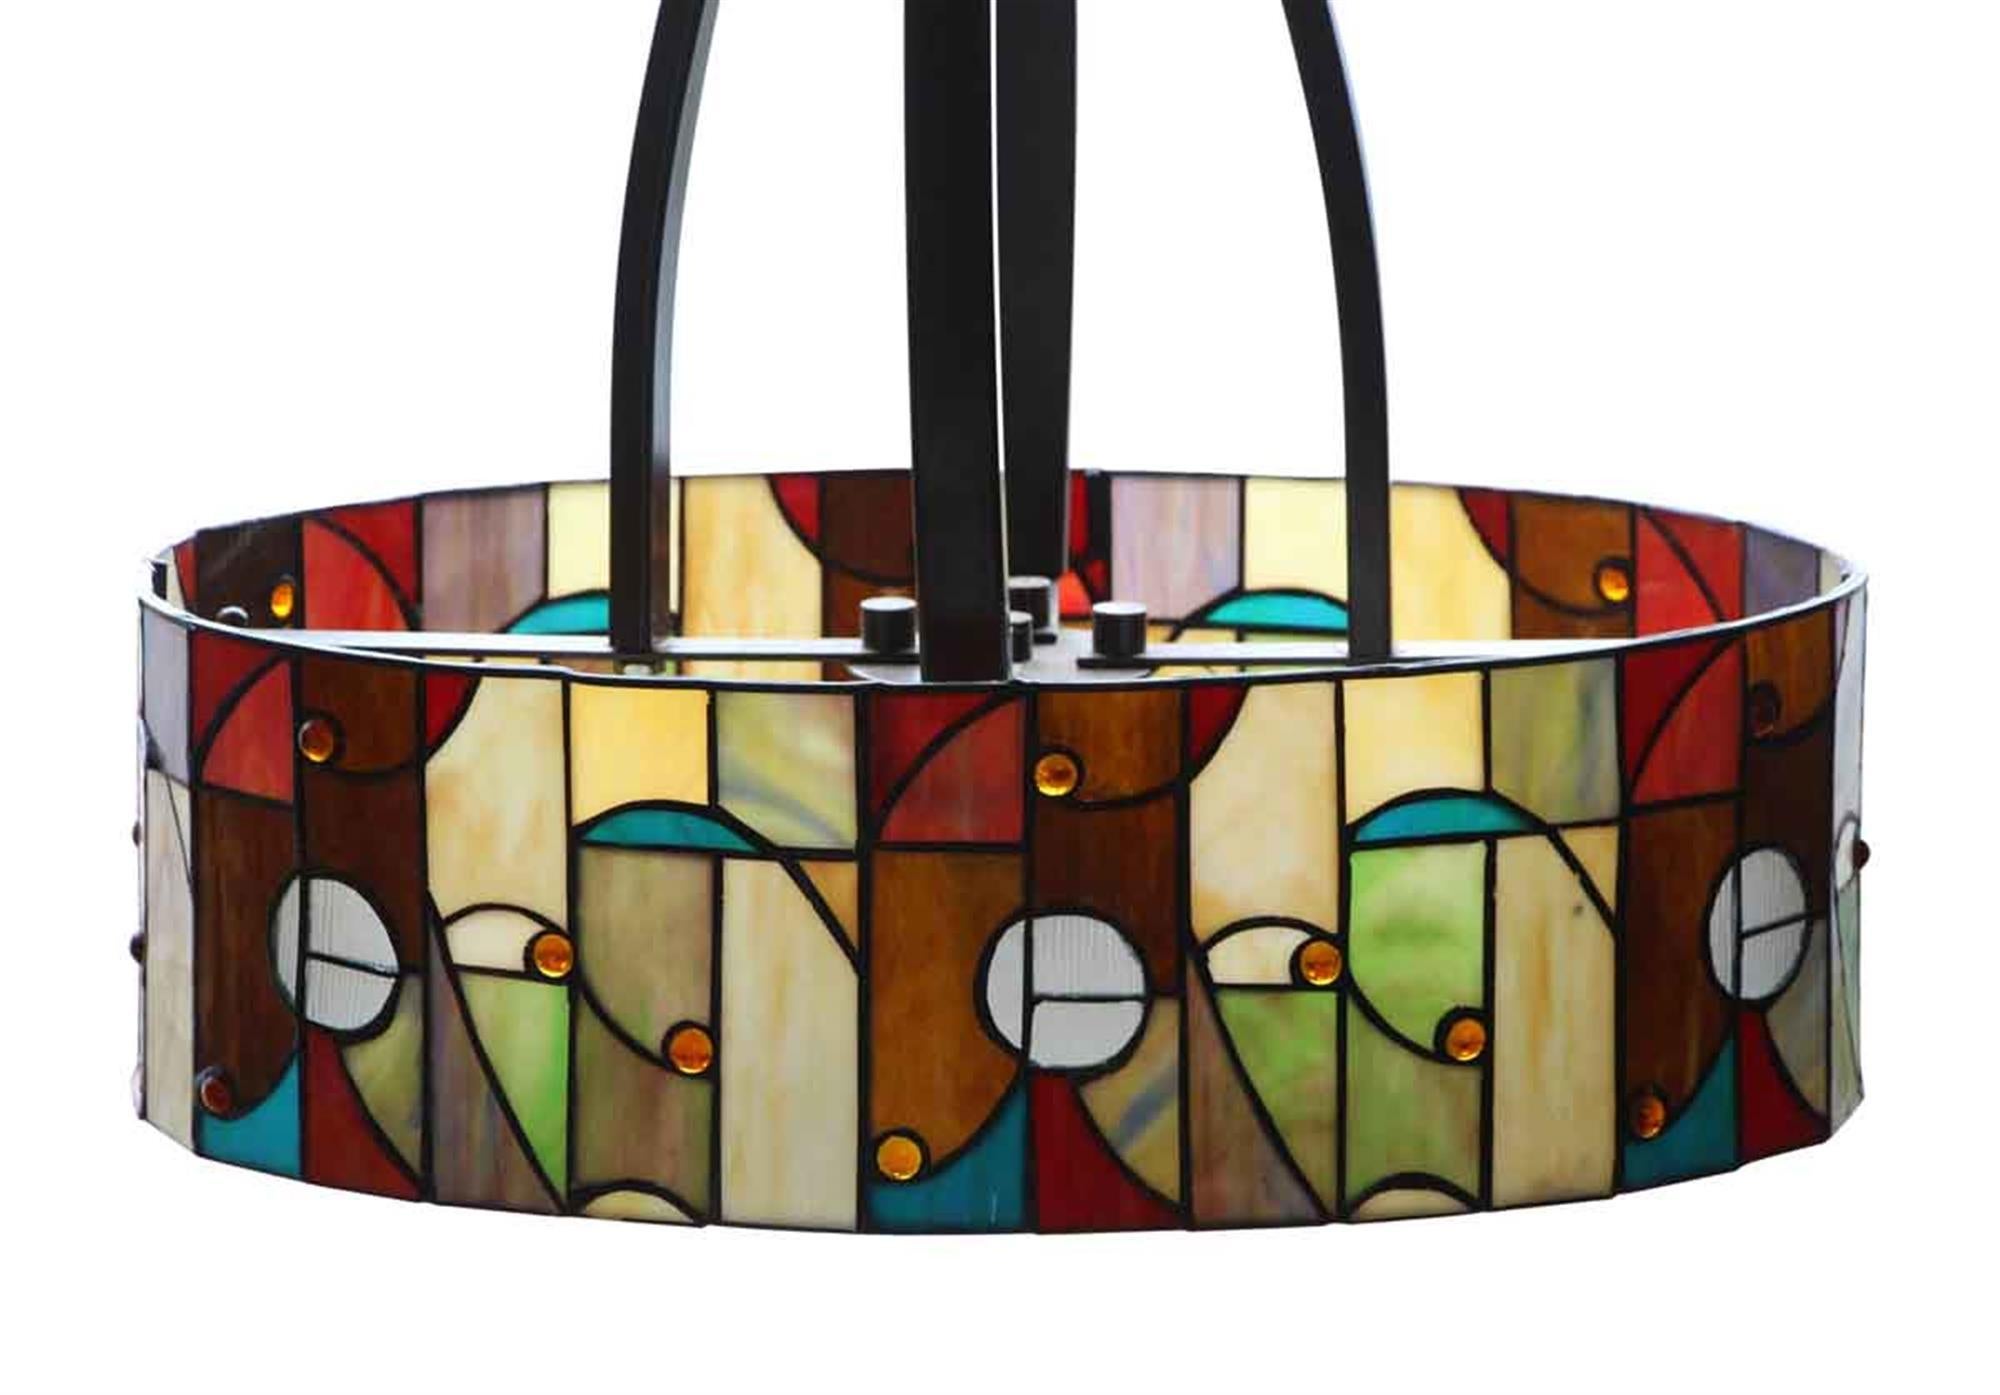 A fusion of Arts and Crafts and Mid-Century Modern styles resulting in an oval shaped stained glass pendant light. Stained glass and bronze colored fitter from 2008. Takes four bulbs. This can be seen at our 2420 Broadway location on the upper west